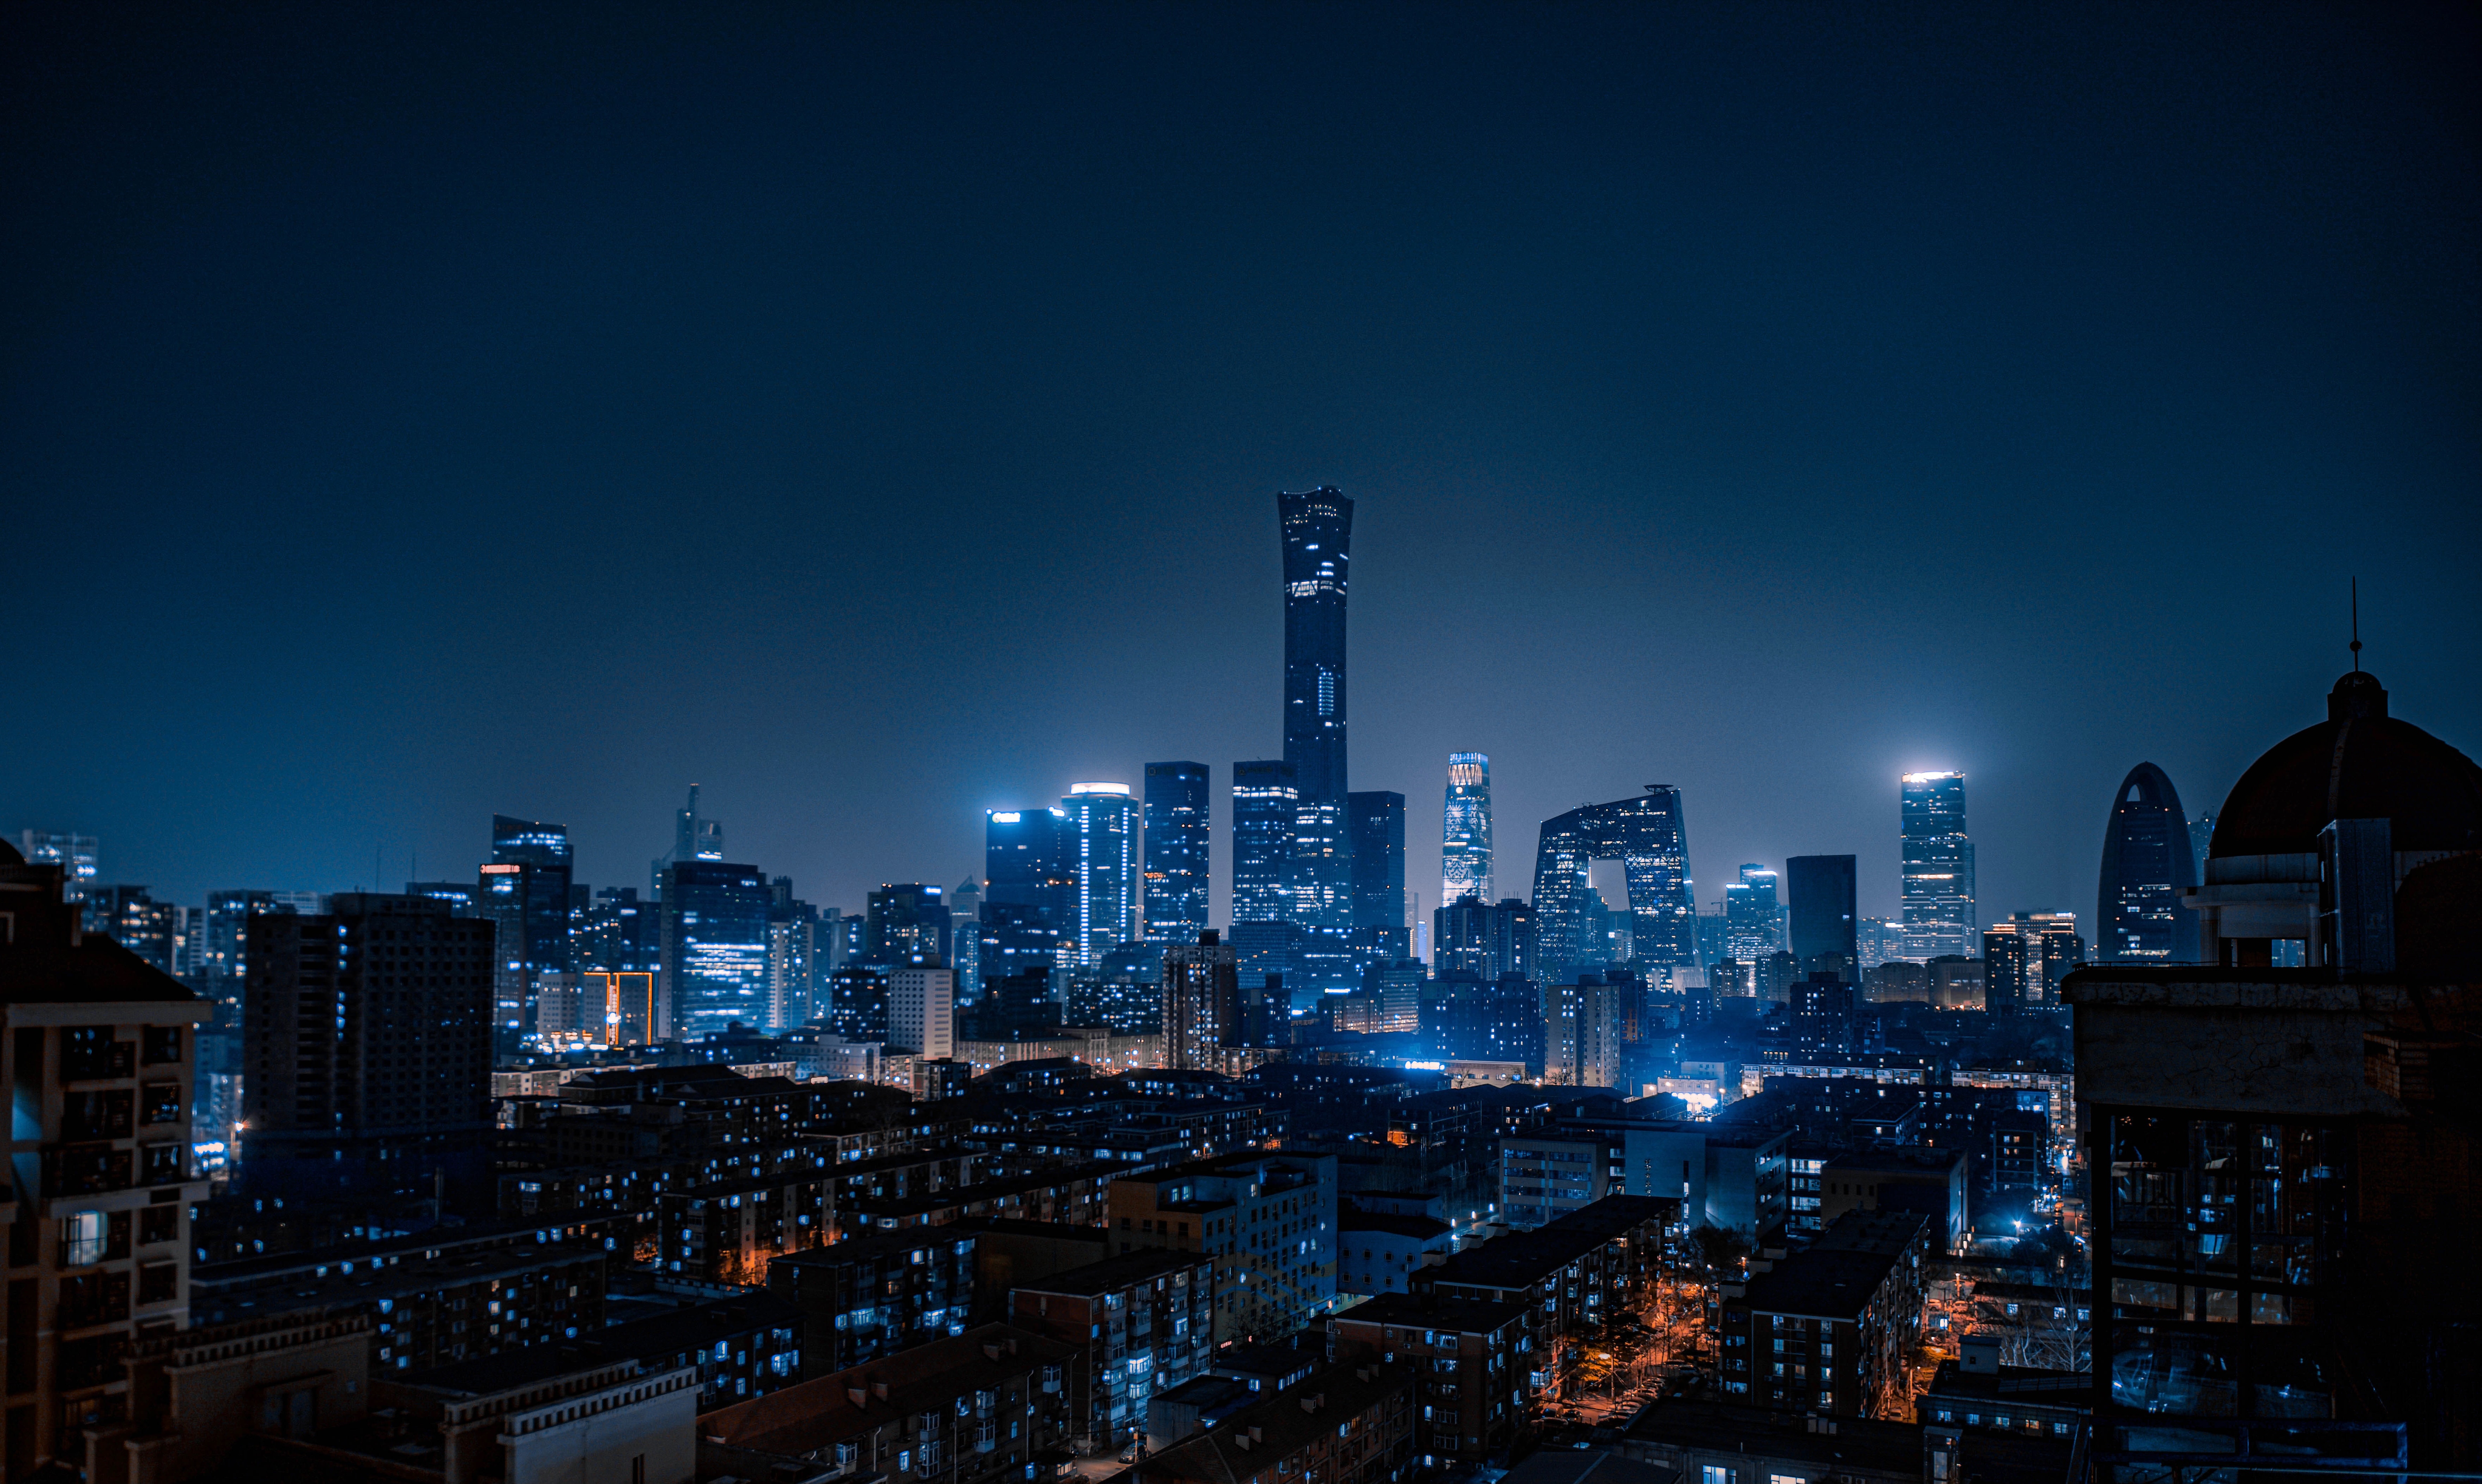 Cool Wallpapers night, view from above, cities, city, building, lights, china, beijing